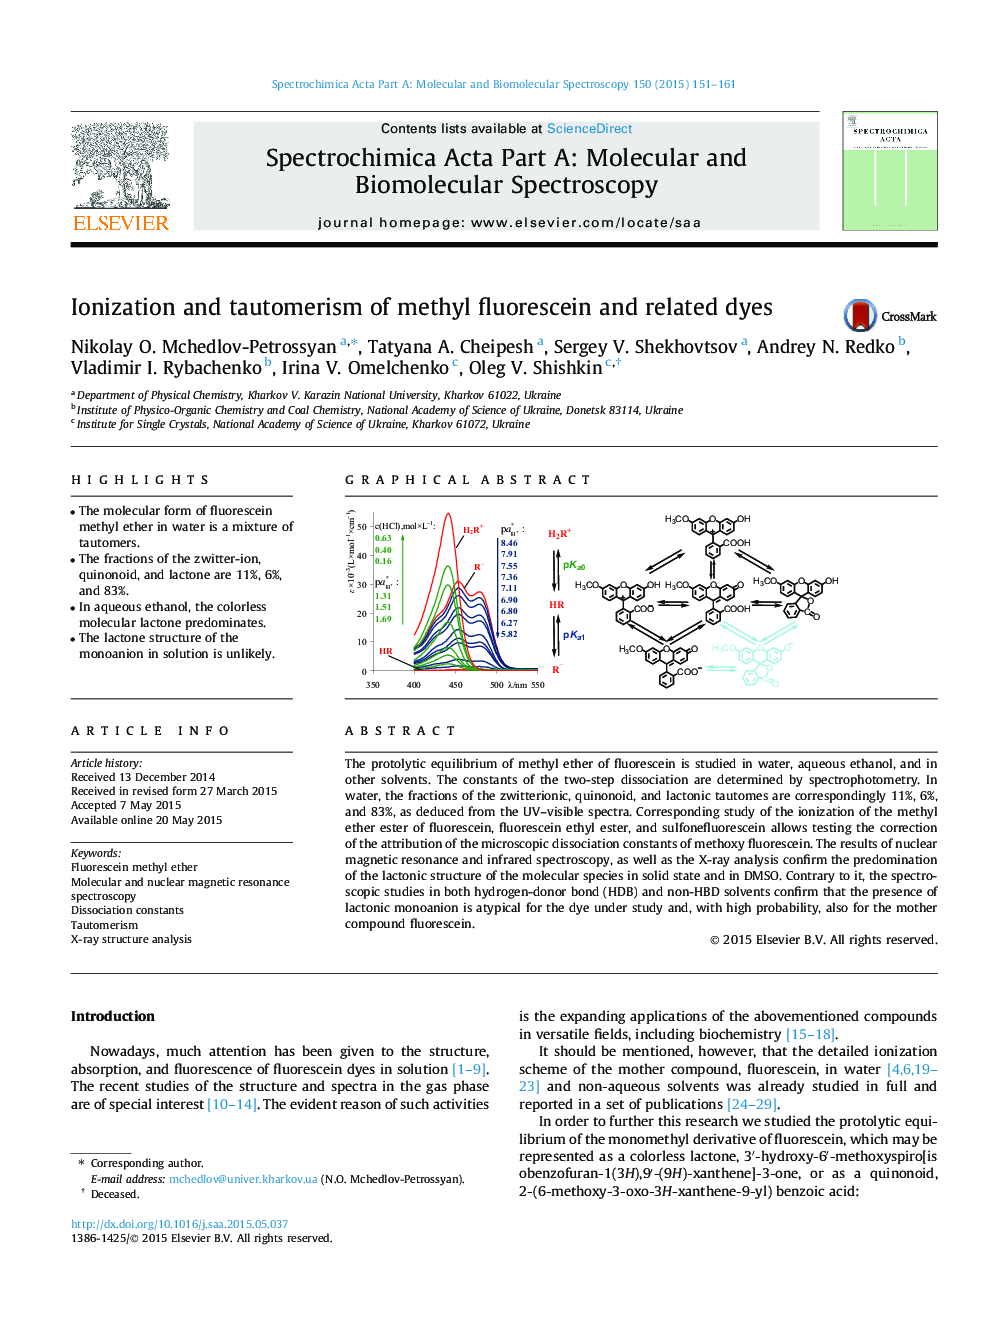 Ionization and tautomerism of methyl fluorescein and related dyes